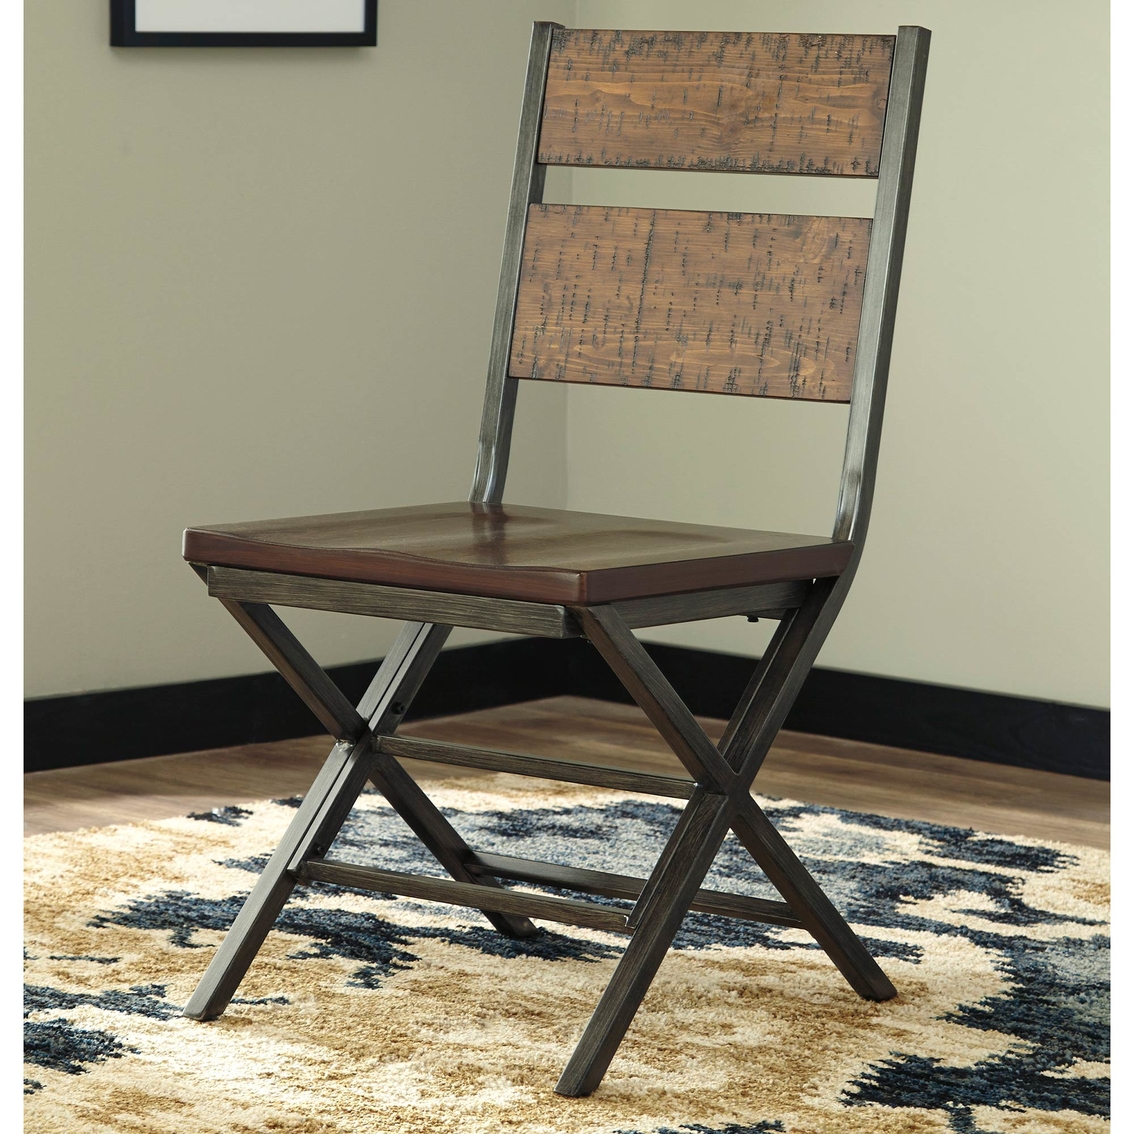 Signature Design by Ashley Kavara Dining Chair 2 pk. - Image 2 of 3